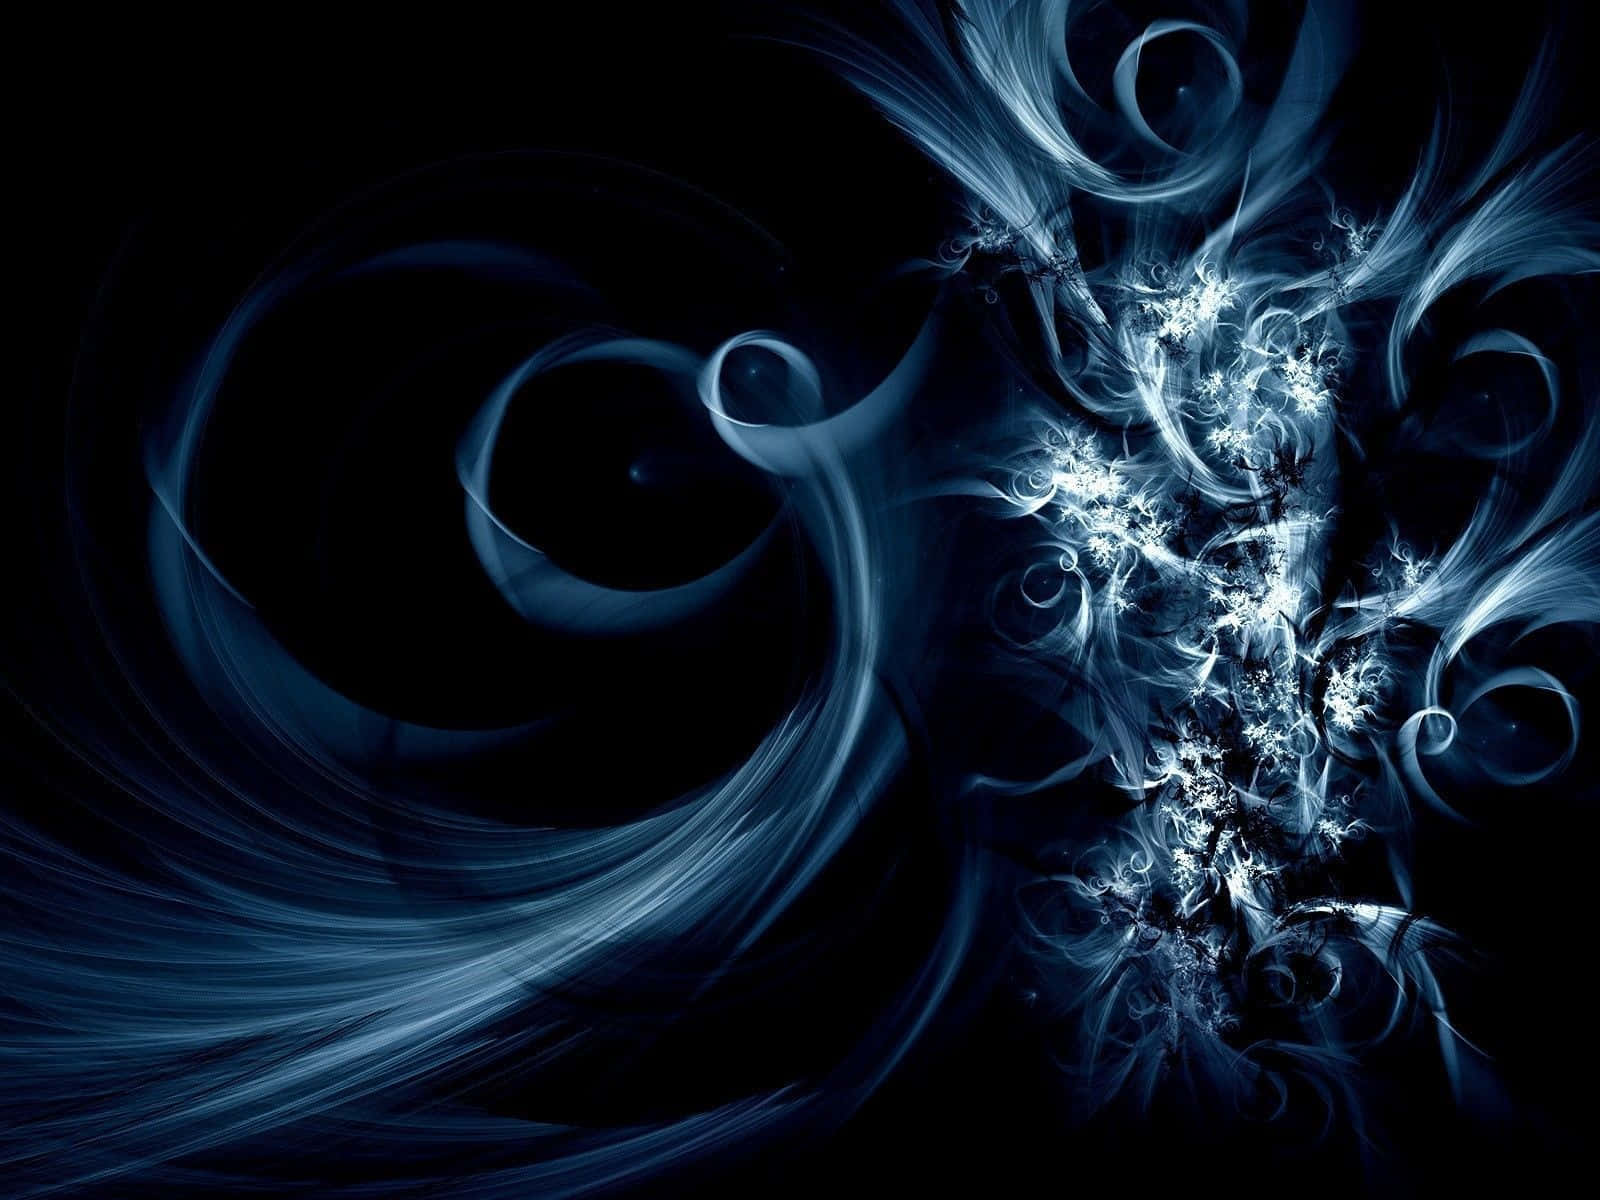 A Blue Abstract Design On A Black Background